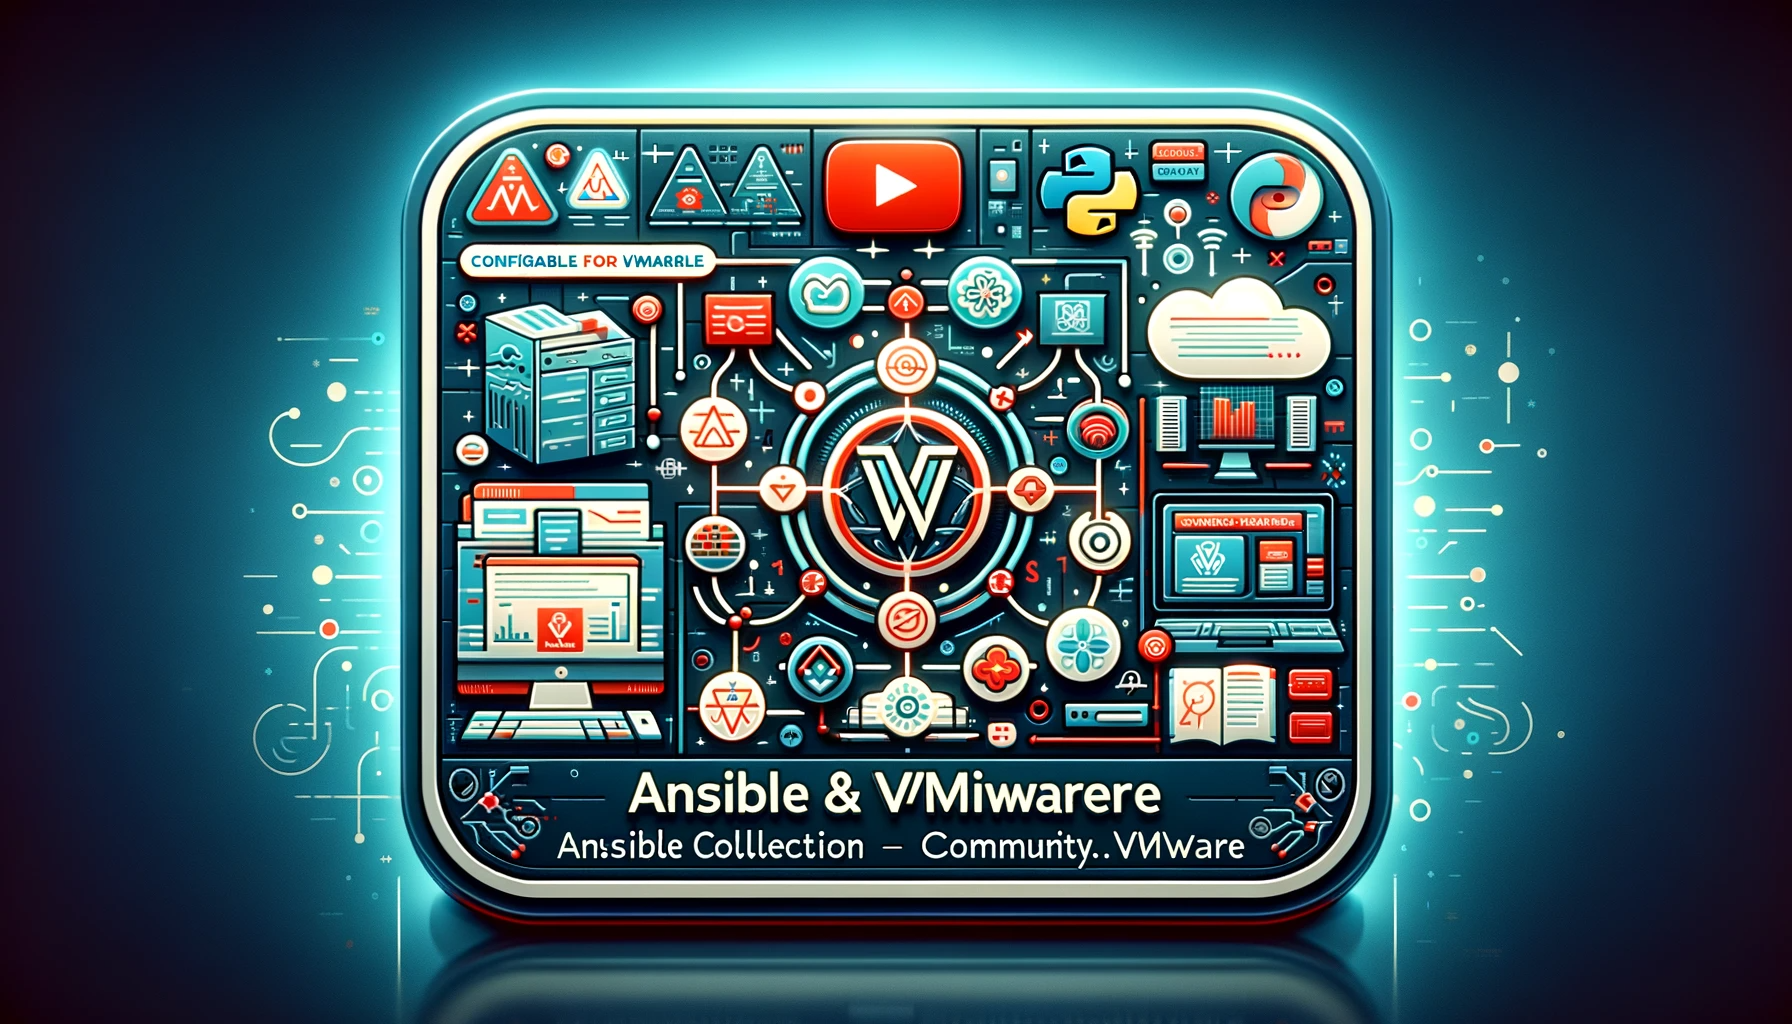 Configure Ansible for VMware - ansible collection community.vmware